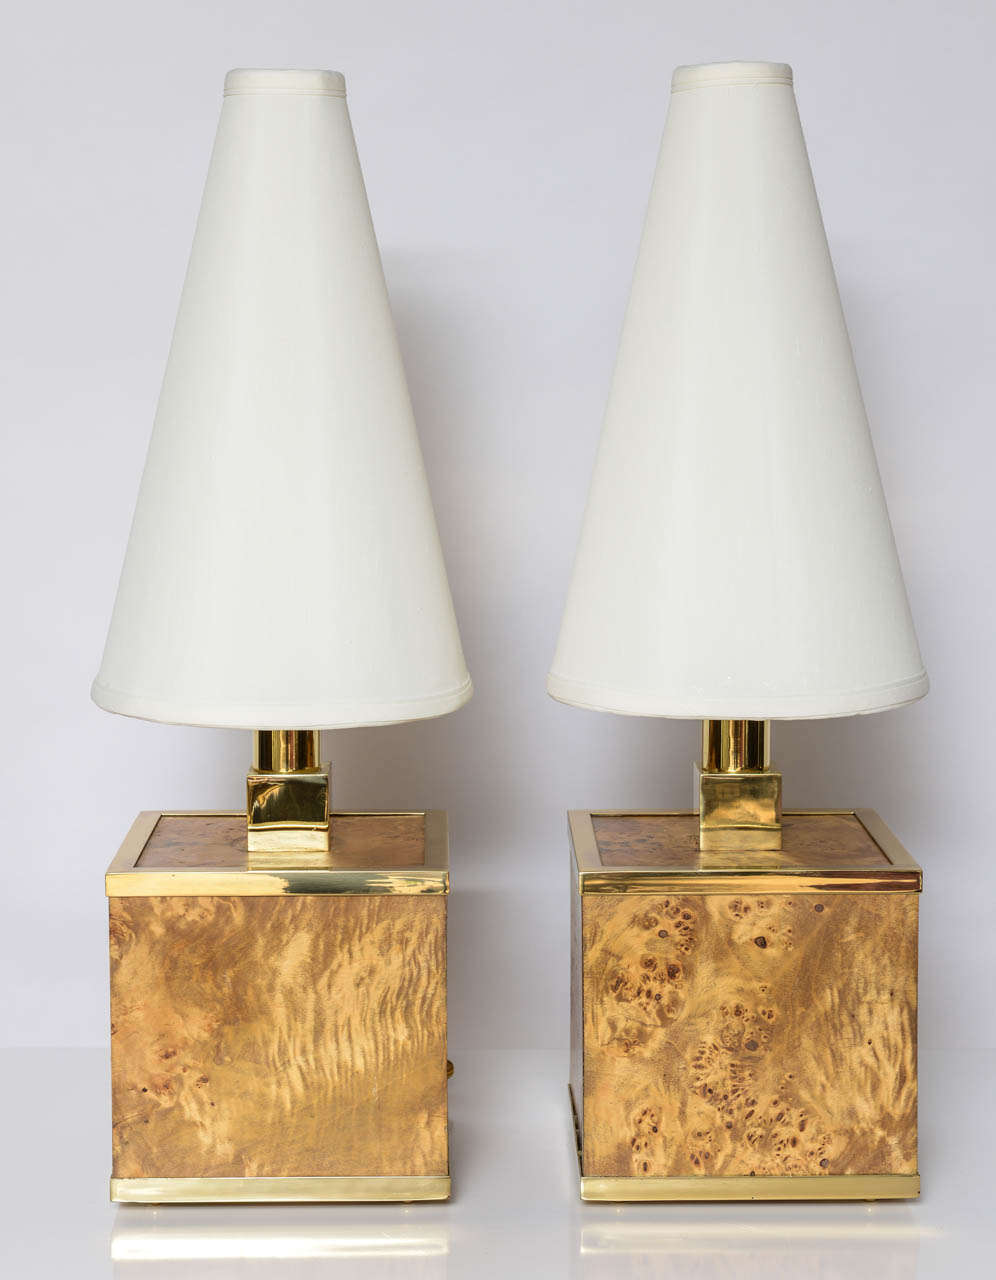 Rewired and polished, this pair of burl wood cube base lamps with polished brass trim. Custom shades included.